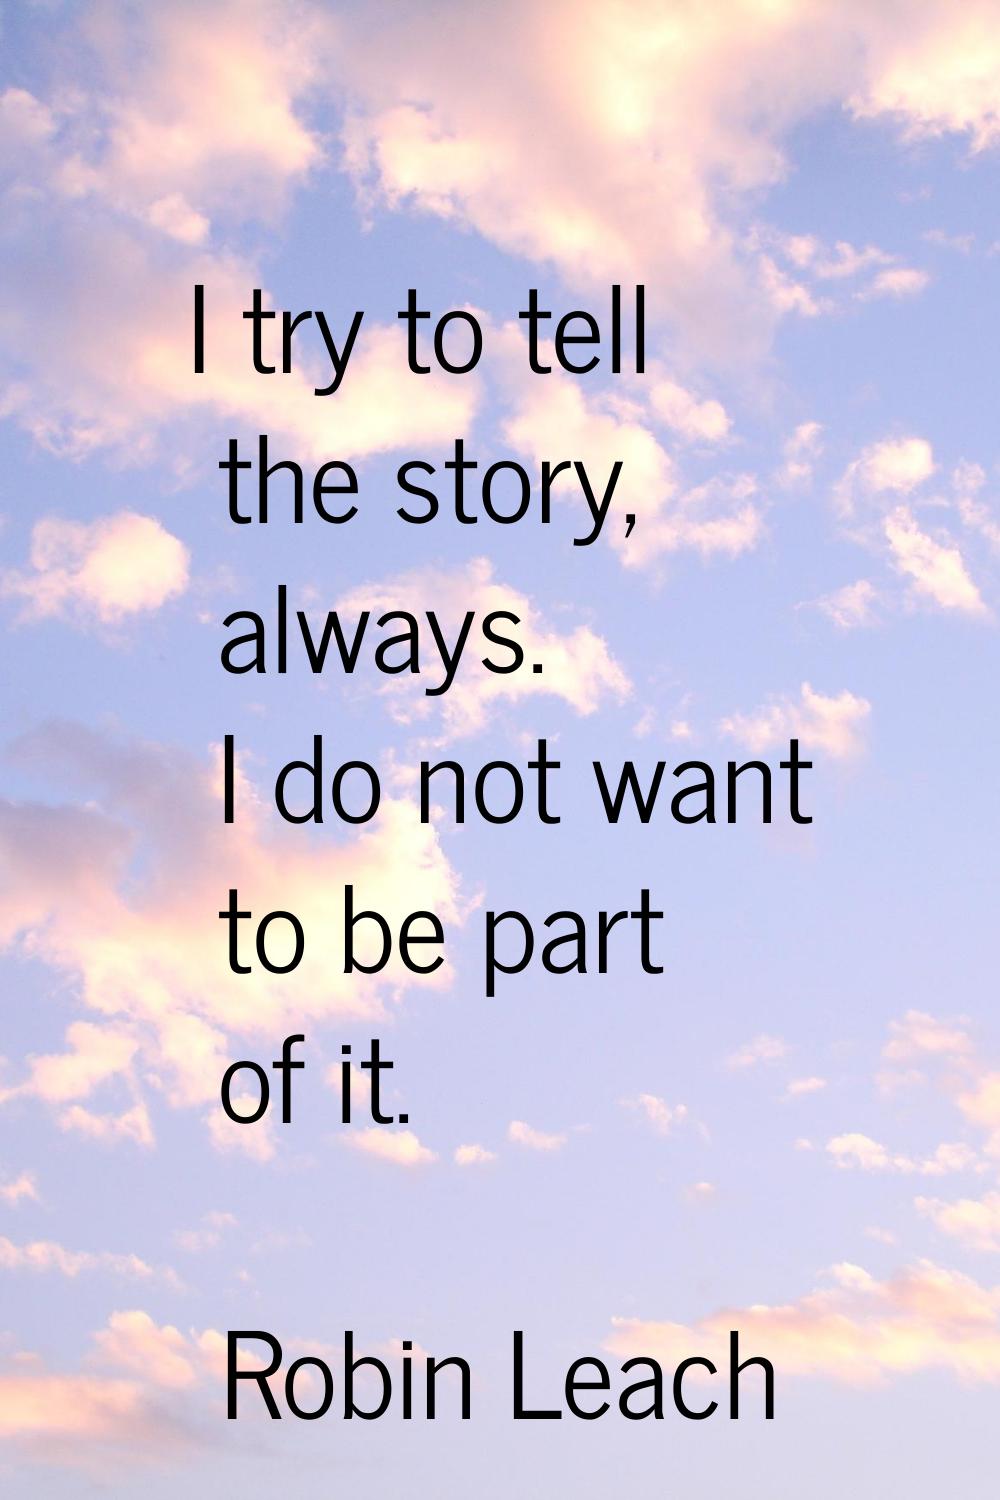 I try to tell the story, always. I do not want to be part of it.